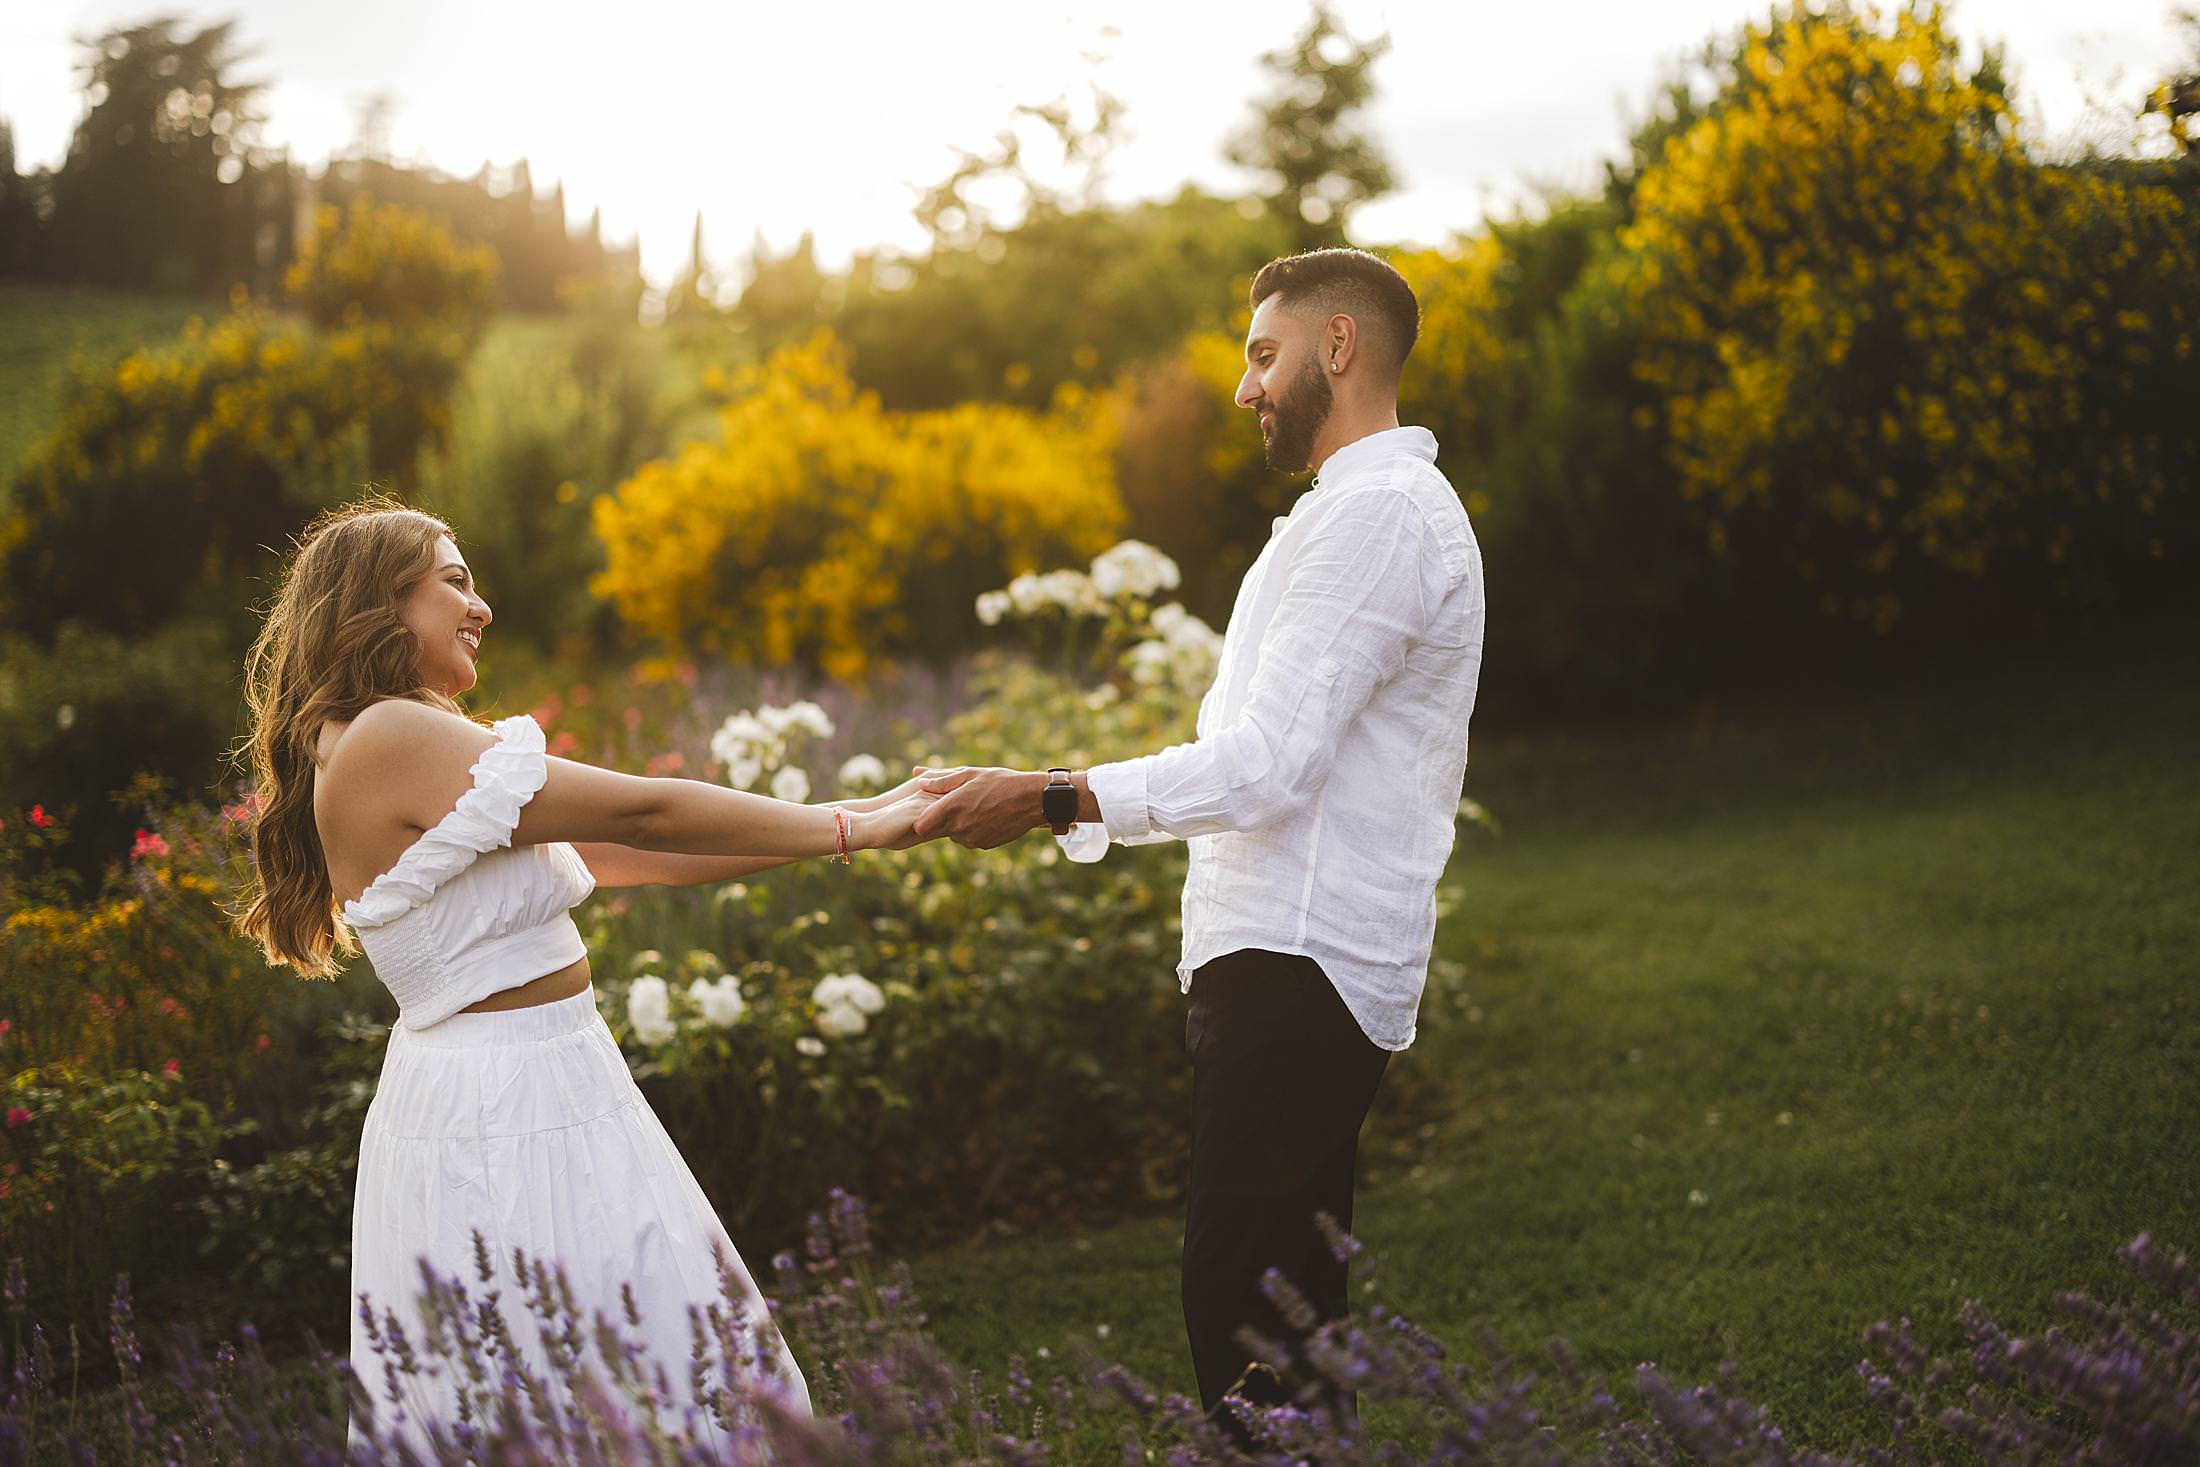 Exiting and lovely couple photo session in Chianti countryside during golden hour at Borgo del Cabreo